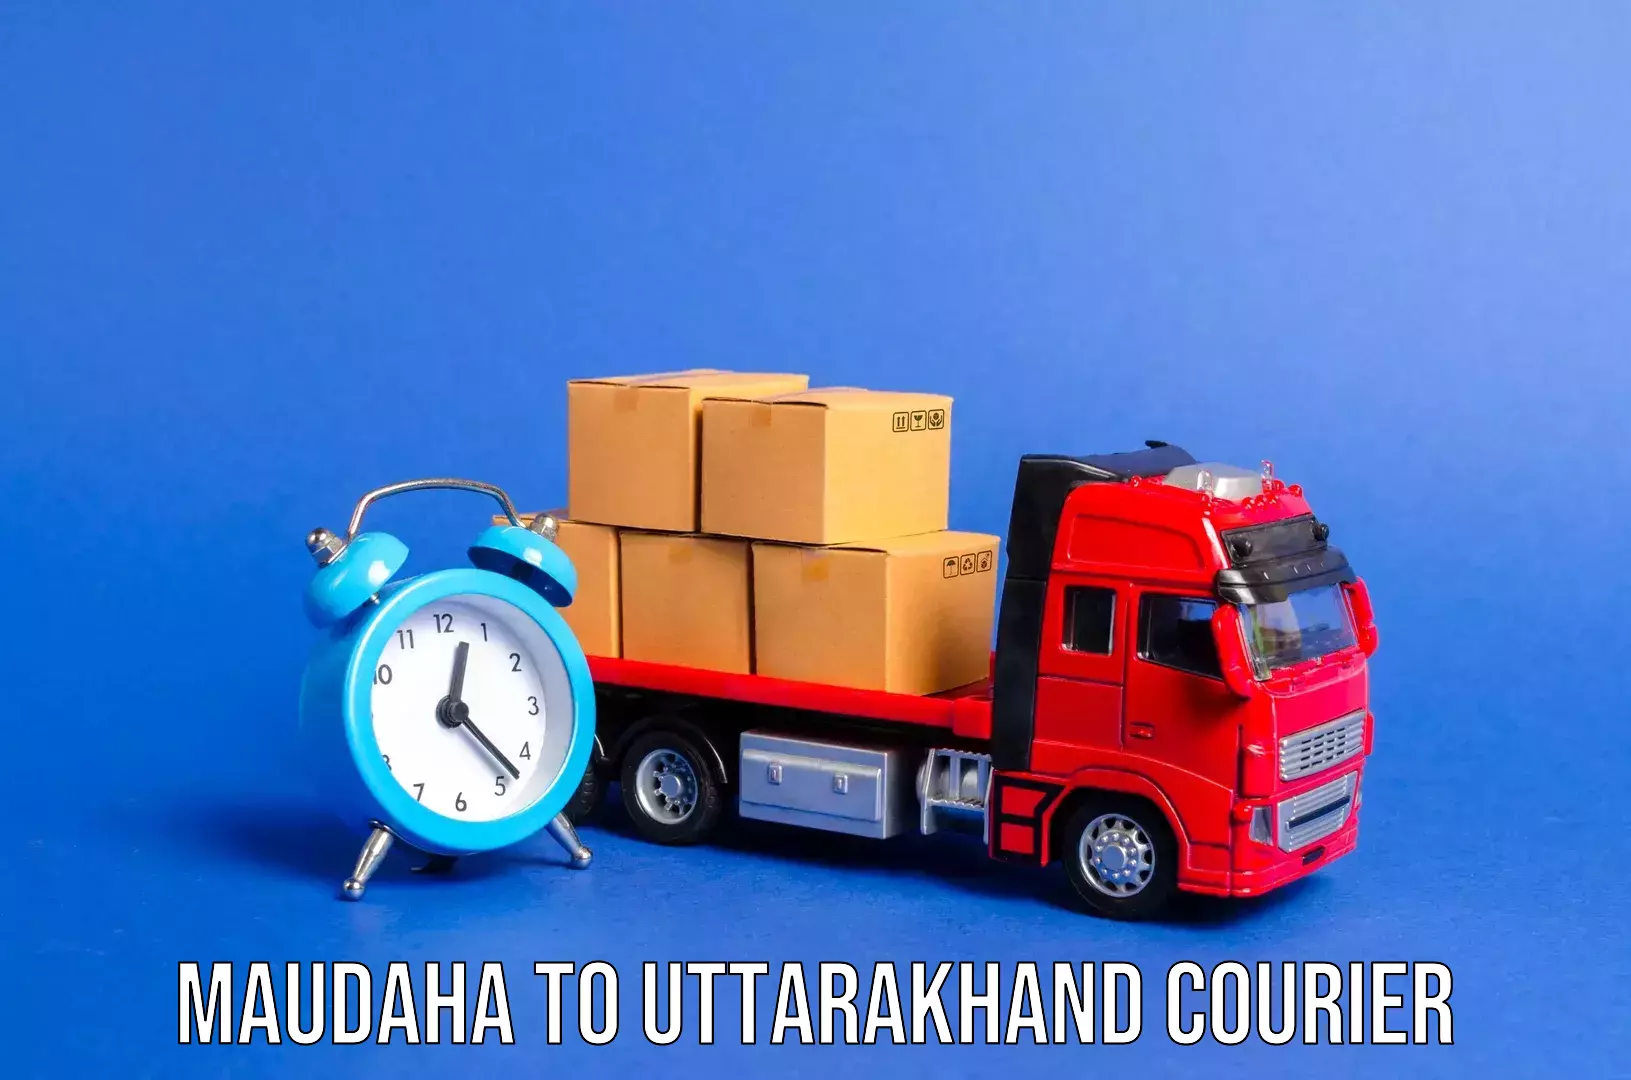 Luggage storage and delivery Maudaha to IIT Roorkee